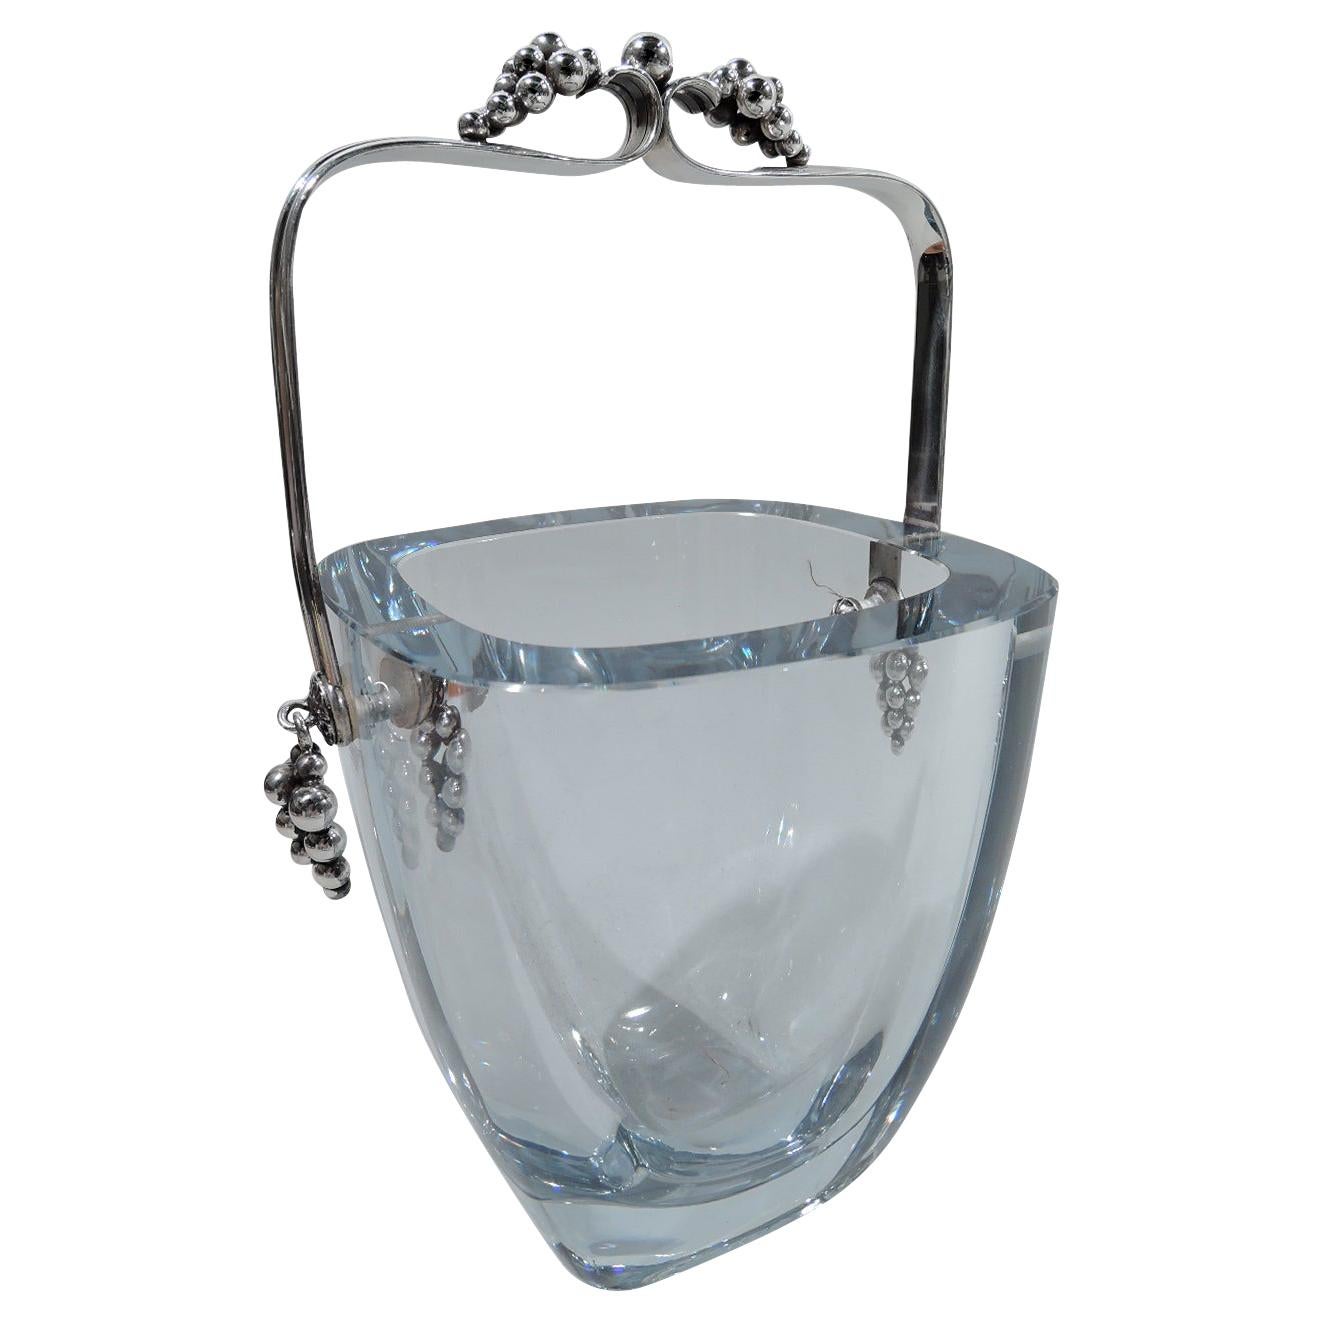 Danish Mid-Century Modern Sterling Silver and Glass Ice Bucket